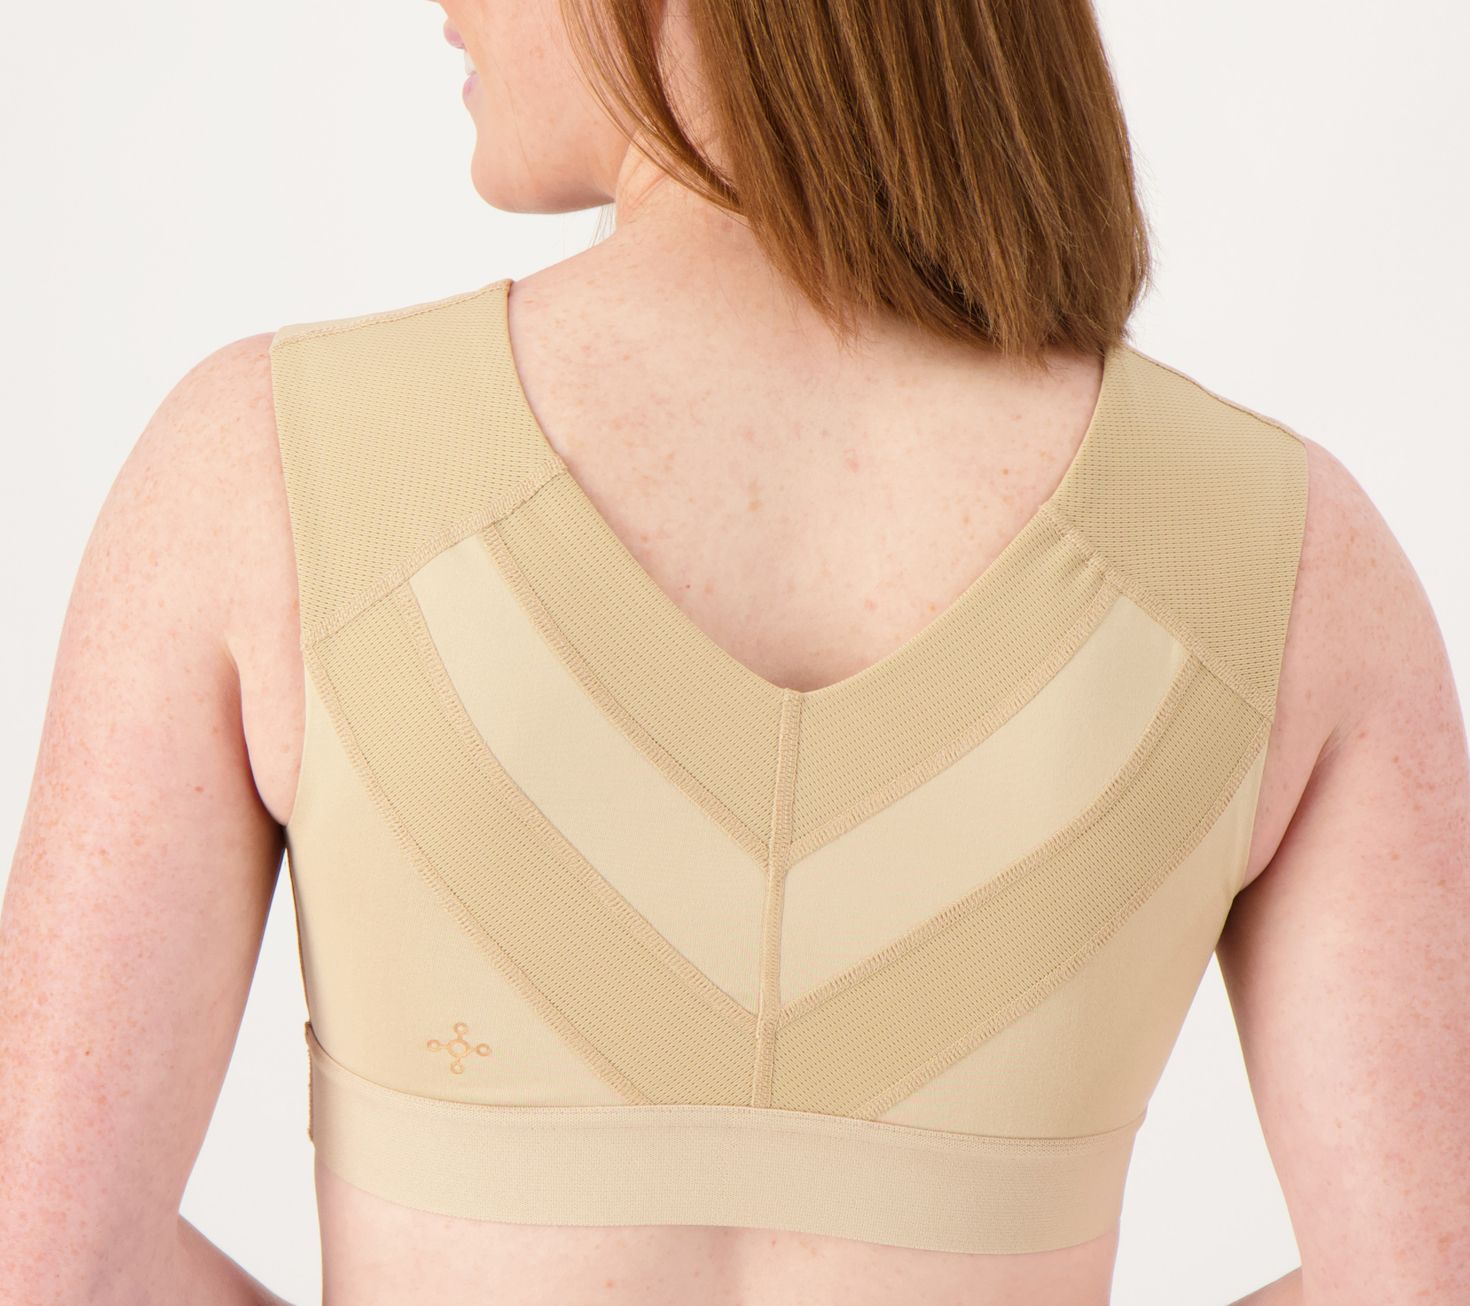 Tommie Copper Women's Shoulder Support Bra I Breathable, Sweat Wicking  Sports Bra for Healthy Posture & Support, White, XX-Large : Buy Online at  Best Price in KSA - Souq is now 